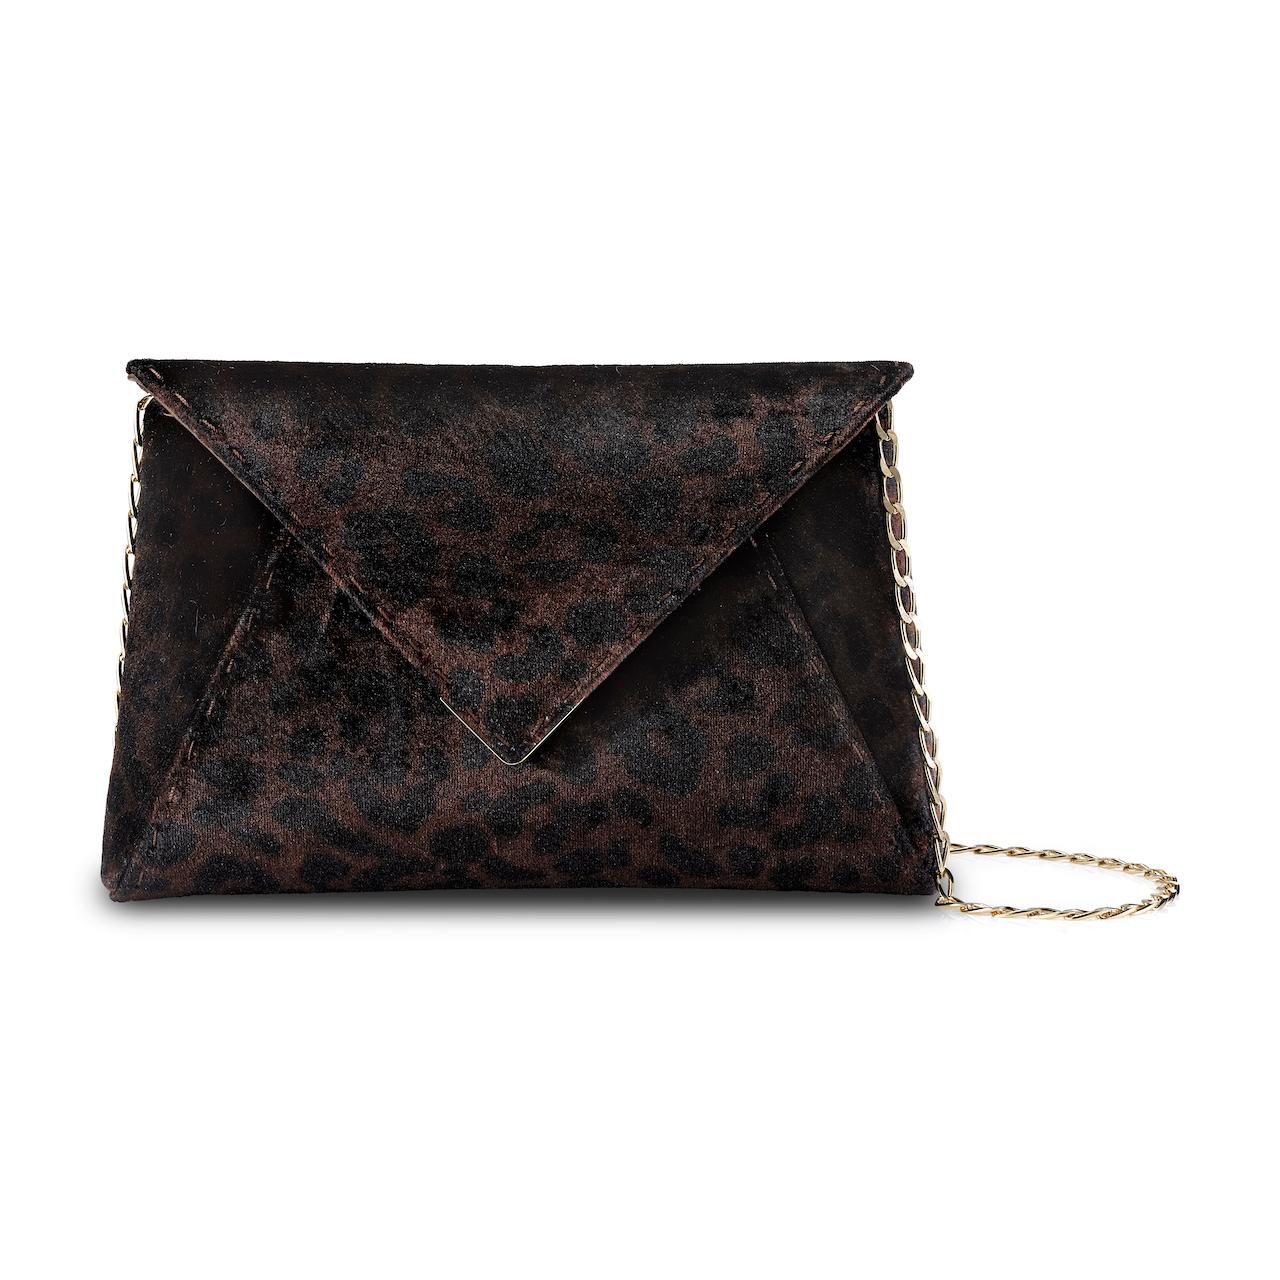 The Lee Pouchet Small is featured in our Leopard Animal Print crushed velvet with gold hardware. The envelope-shaped clutch is designed with a triangular front flap and a magnetic snap closure. The Lee fits the large iPhone, has a hidden exterior